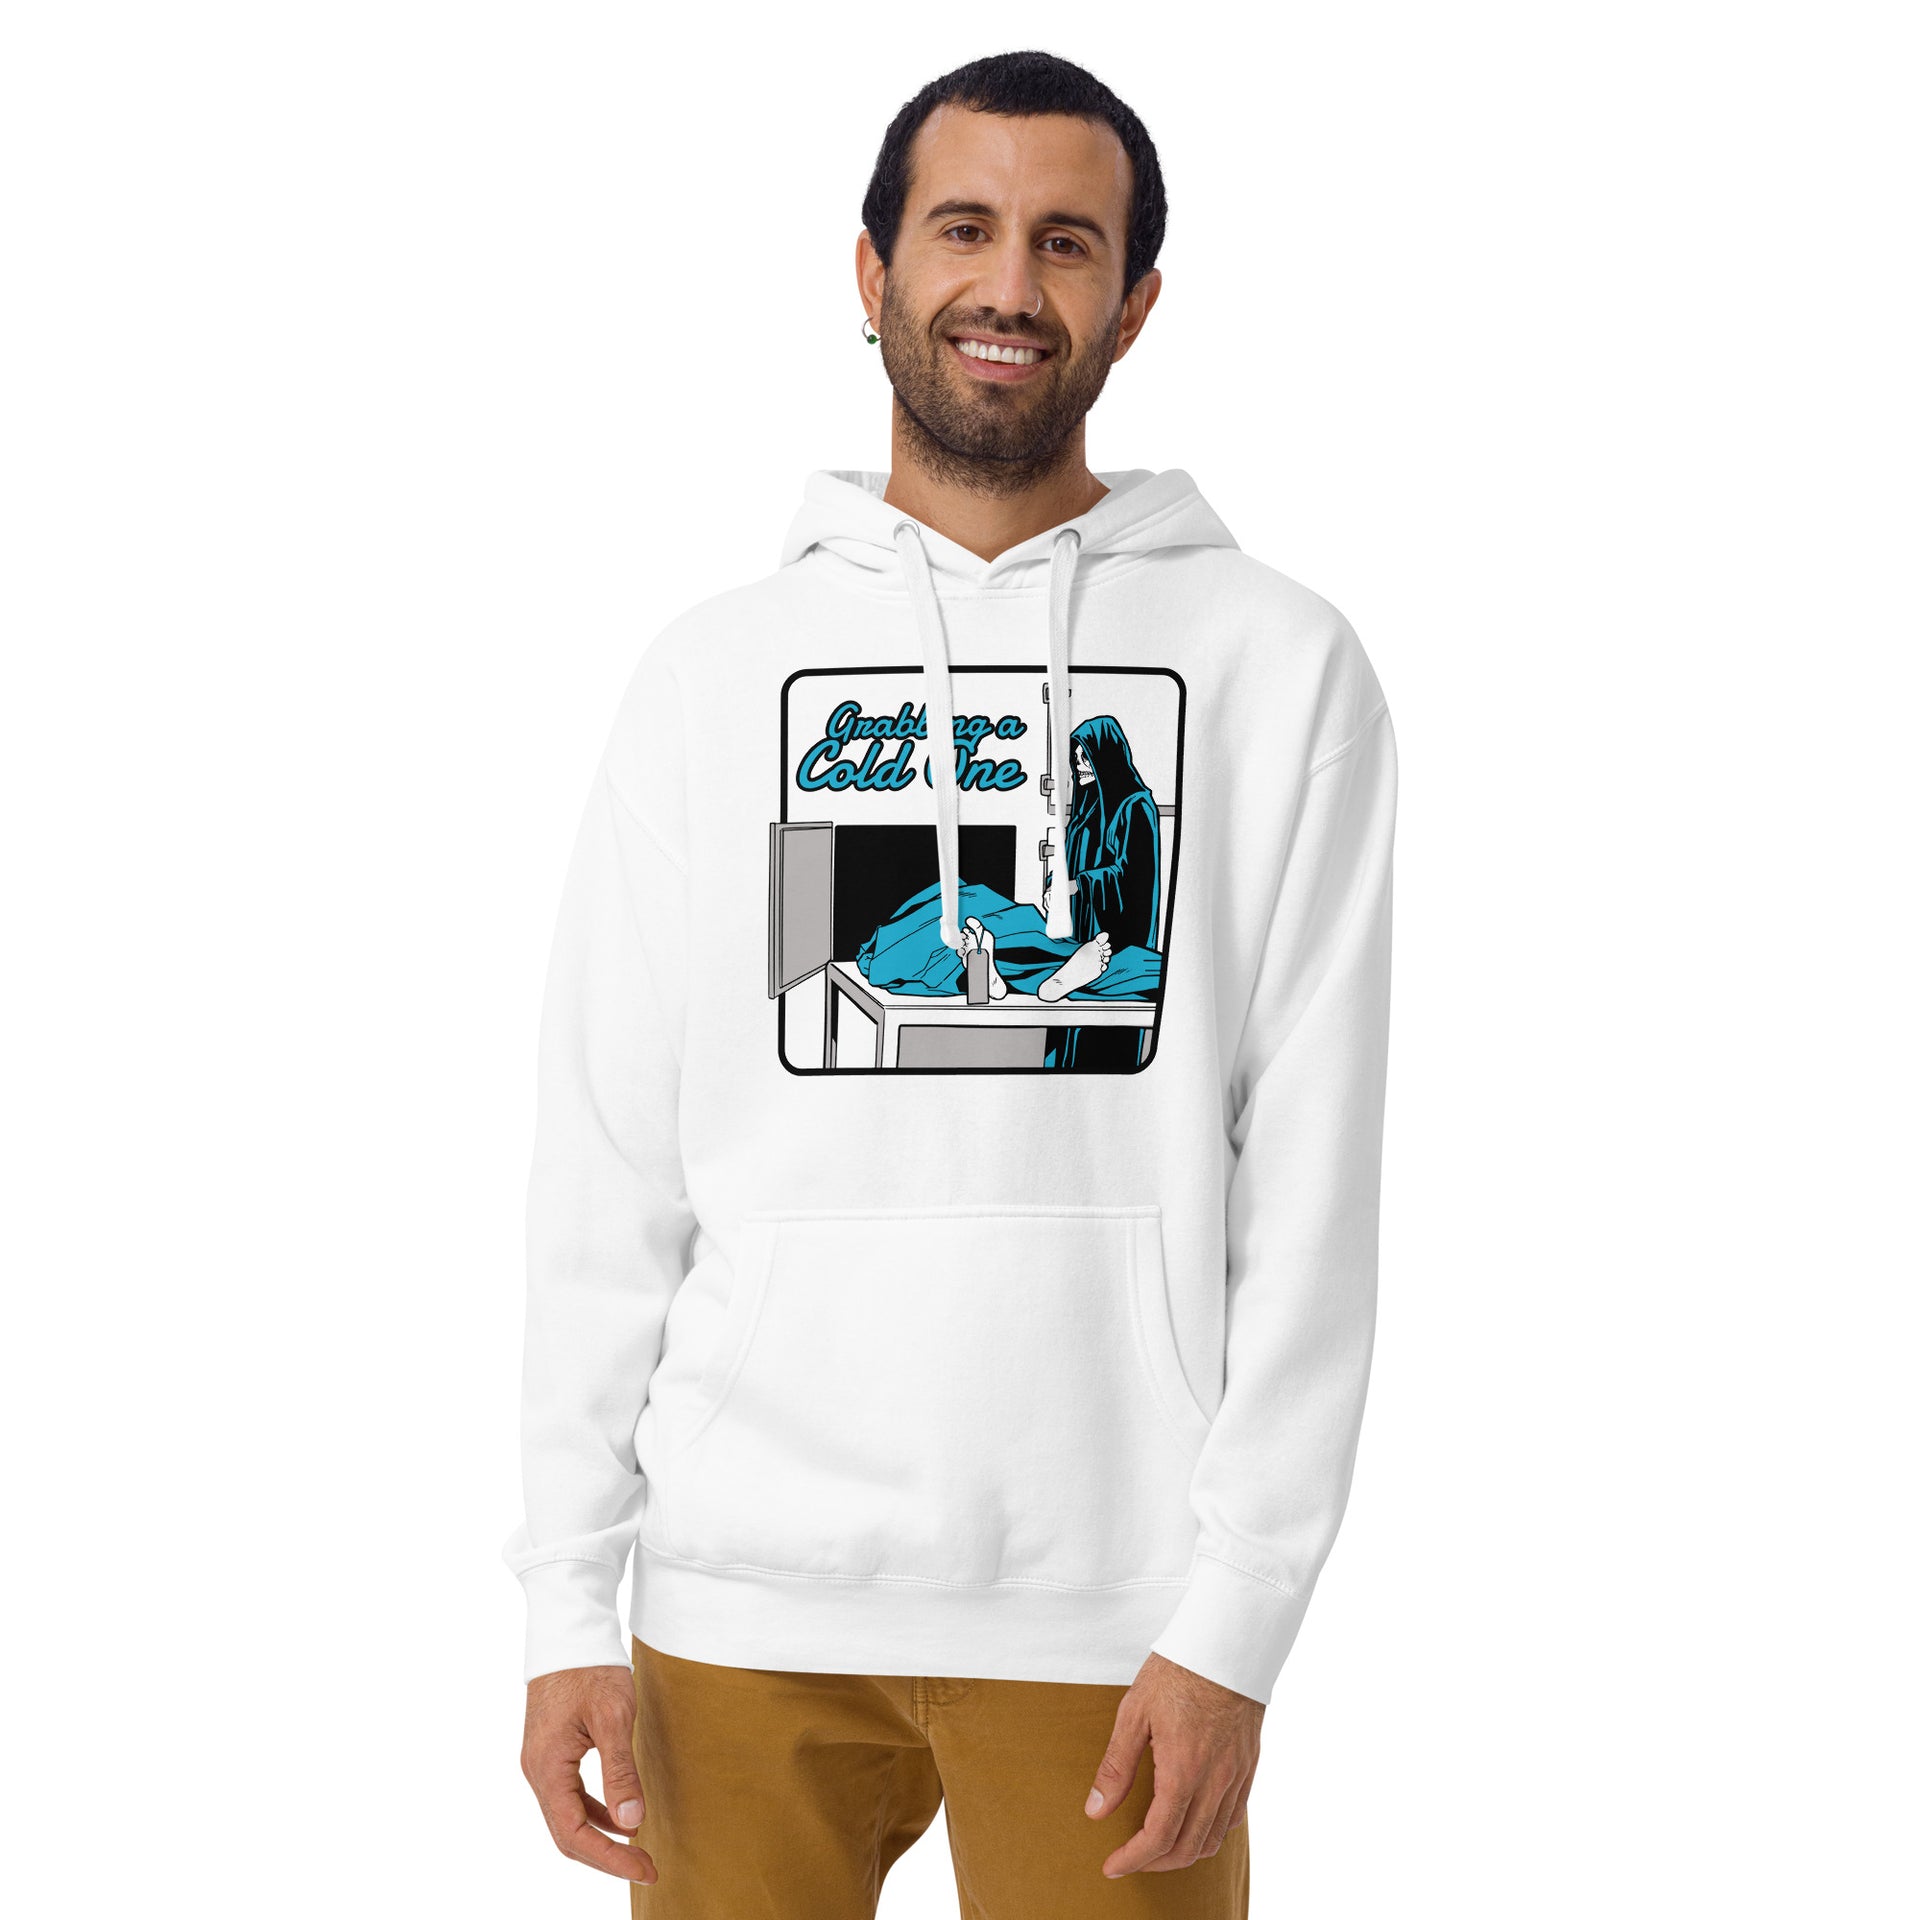 Grabbing A Cold One Unisex Hoodie